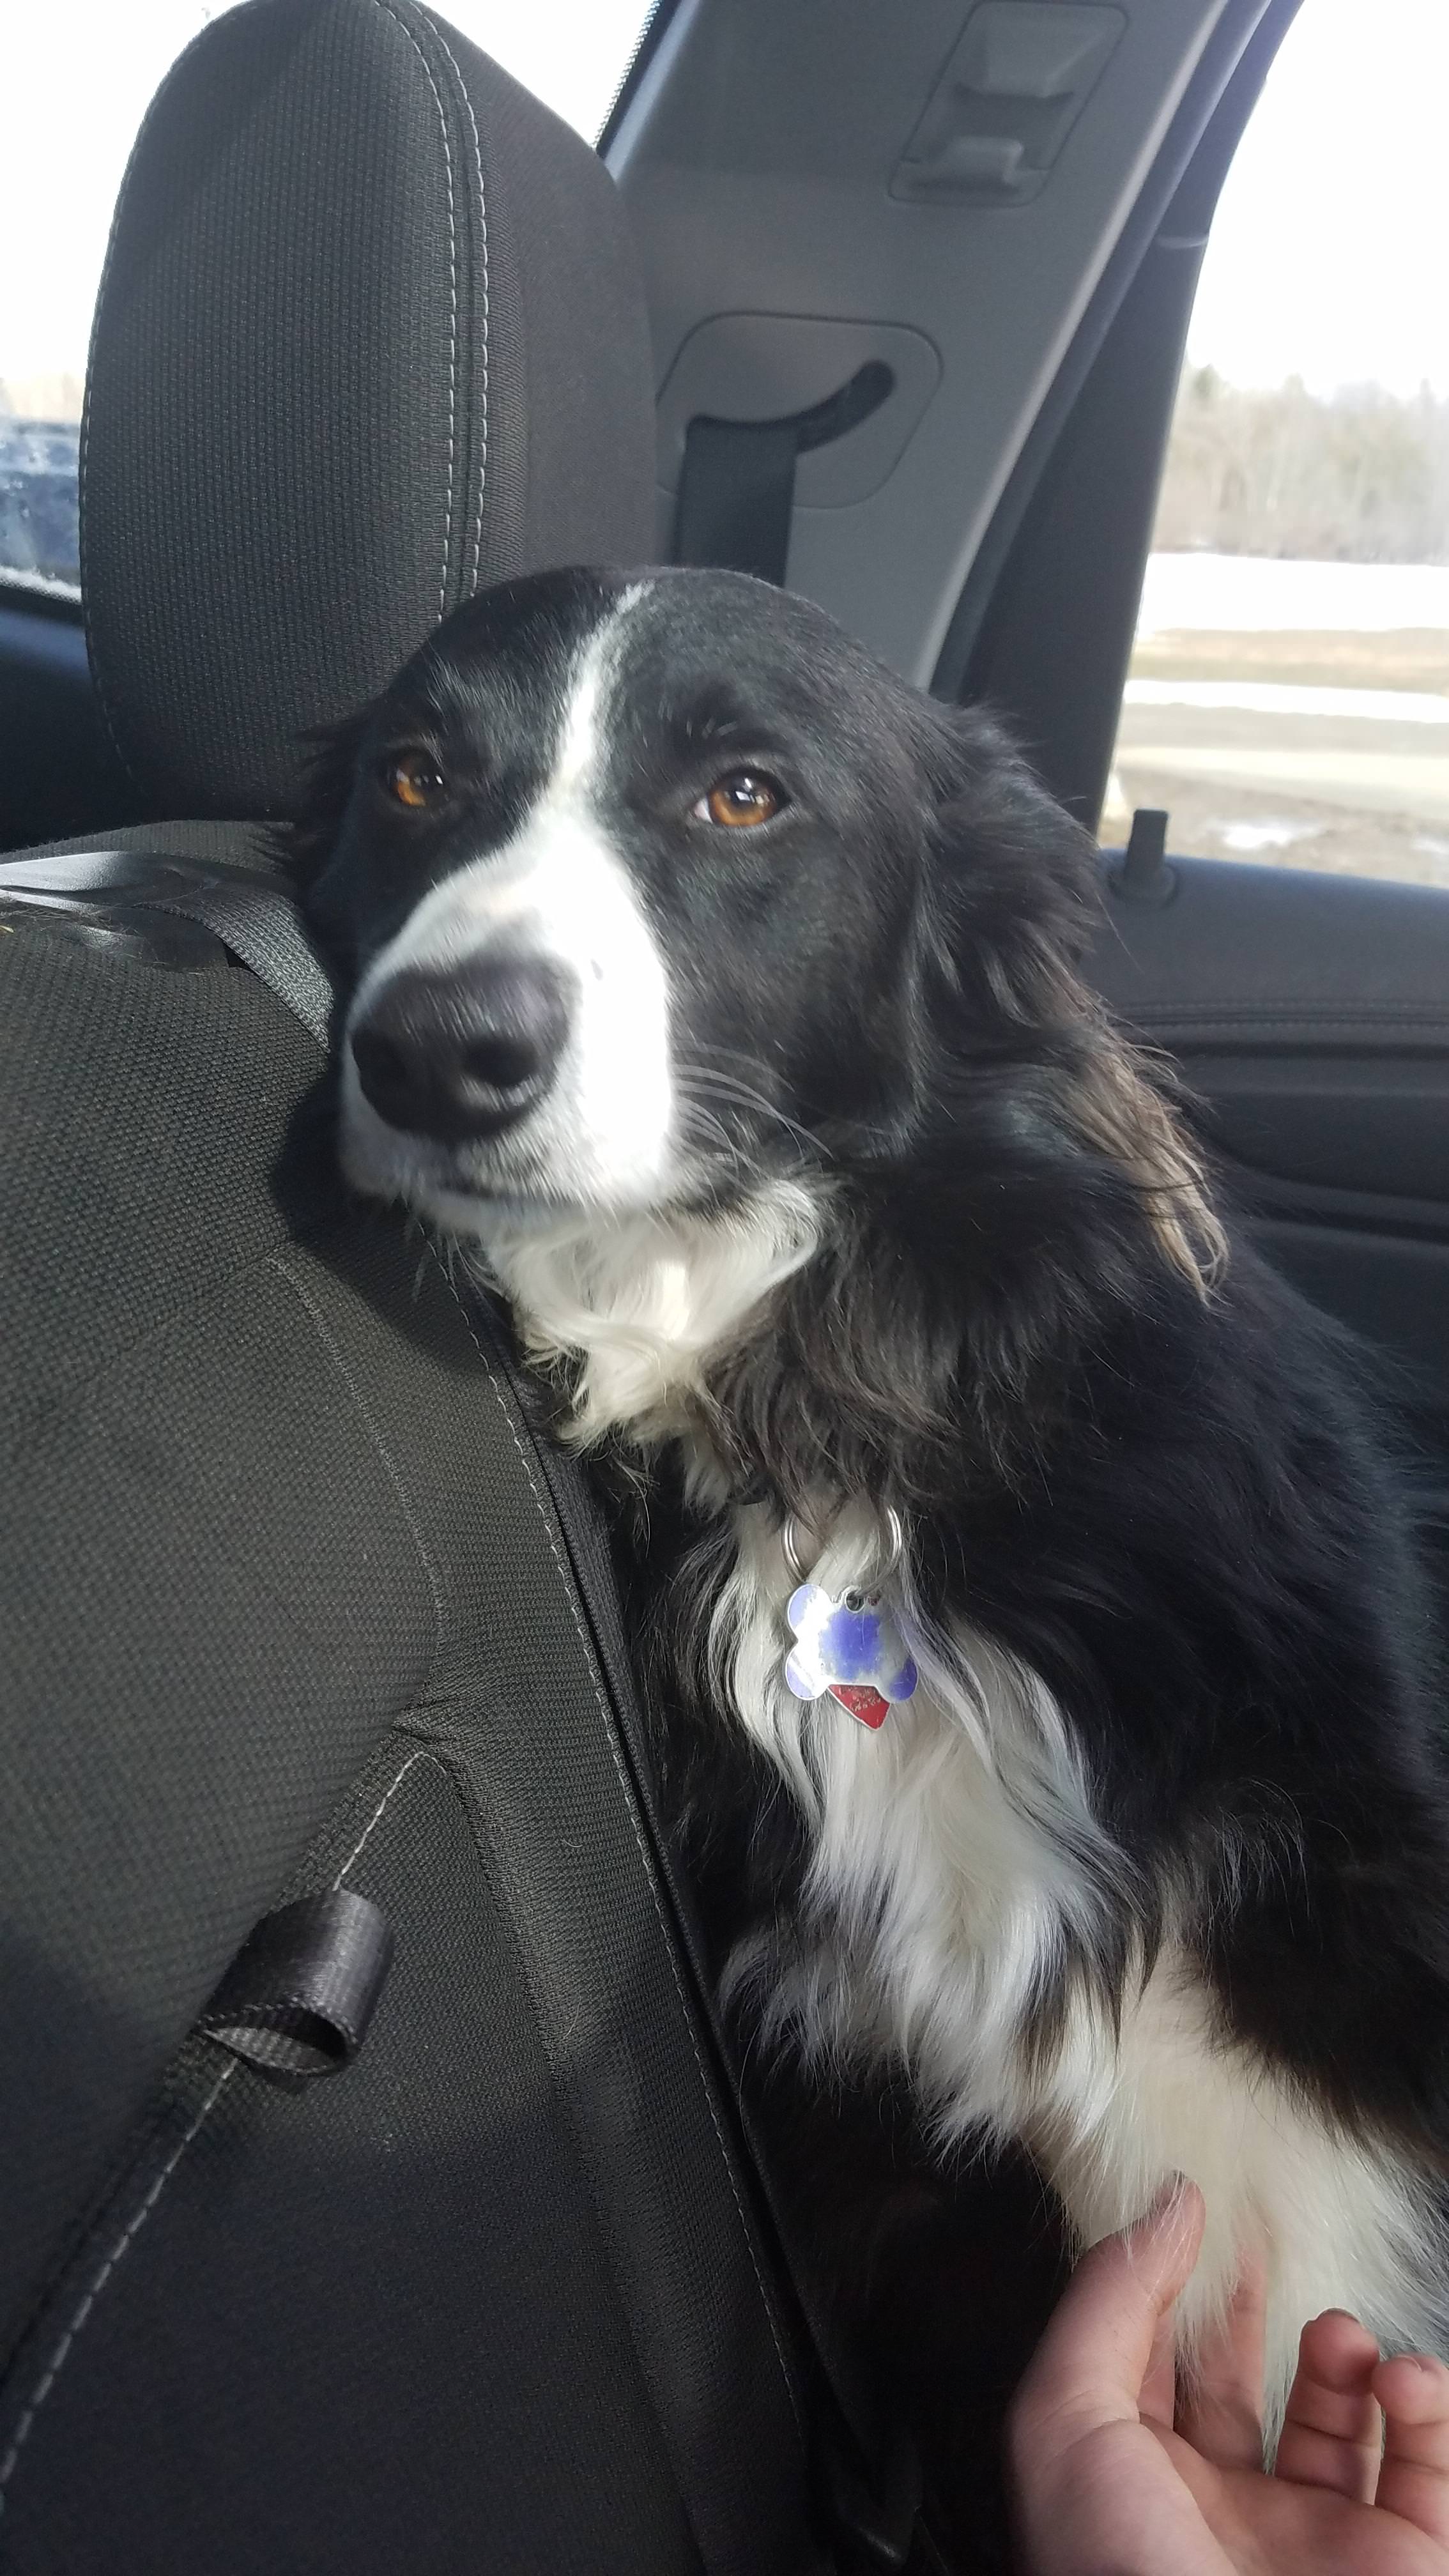 Border Collie sitting inside the car while leaning against the back seat and staring with its adorable eyes